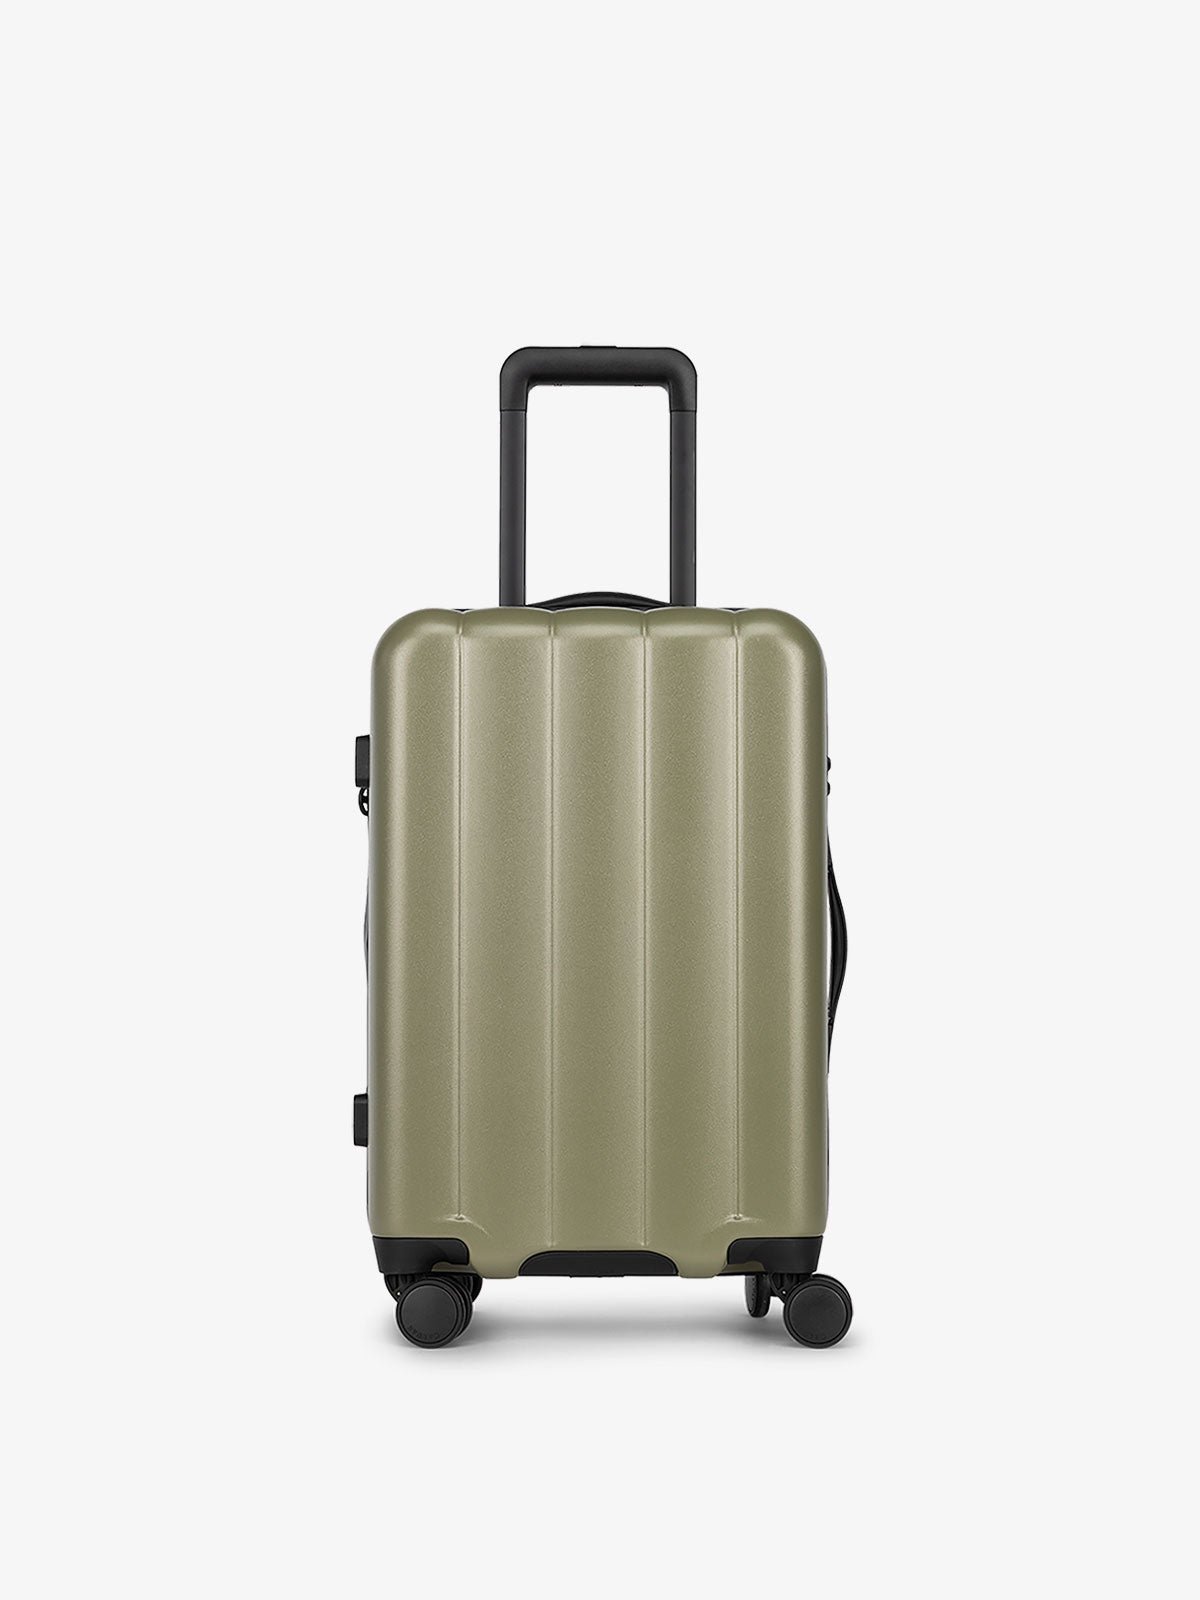 Pistachio green carry-on luggage made from an ultra-durable polycarbonate shell and expandable by up to 2"